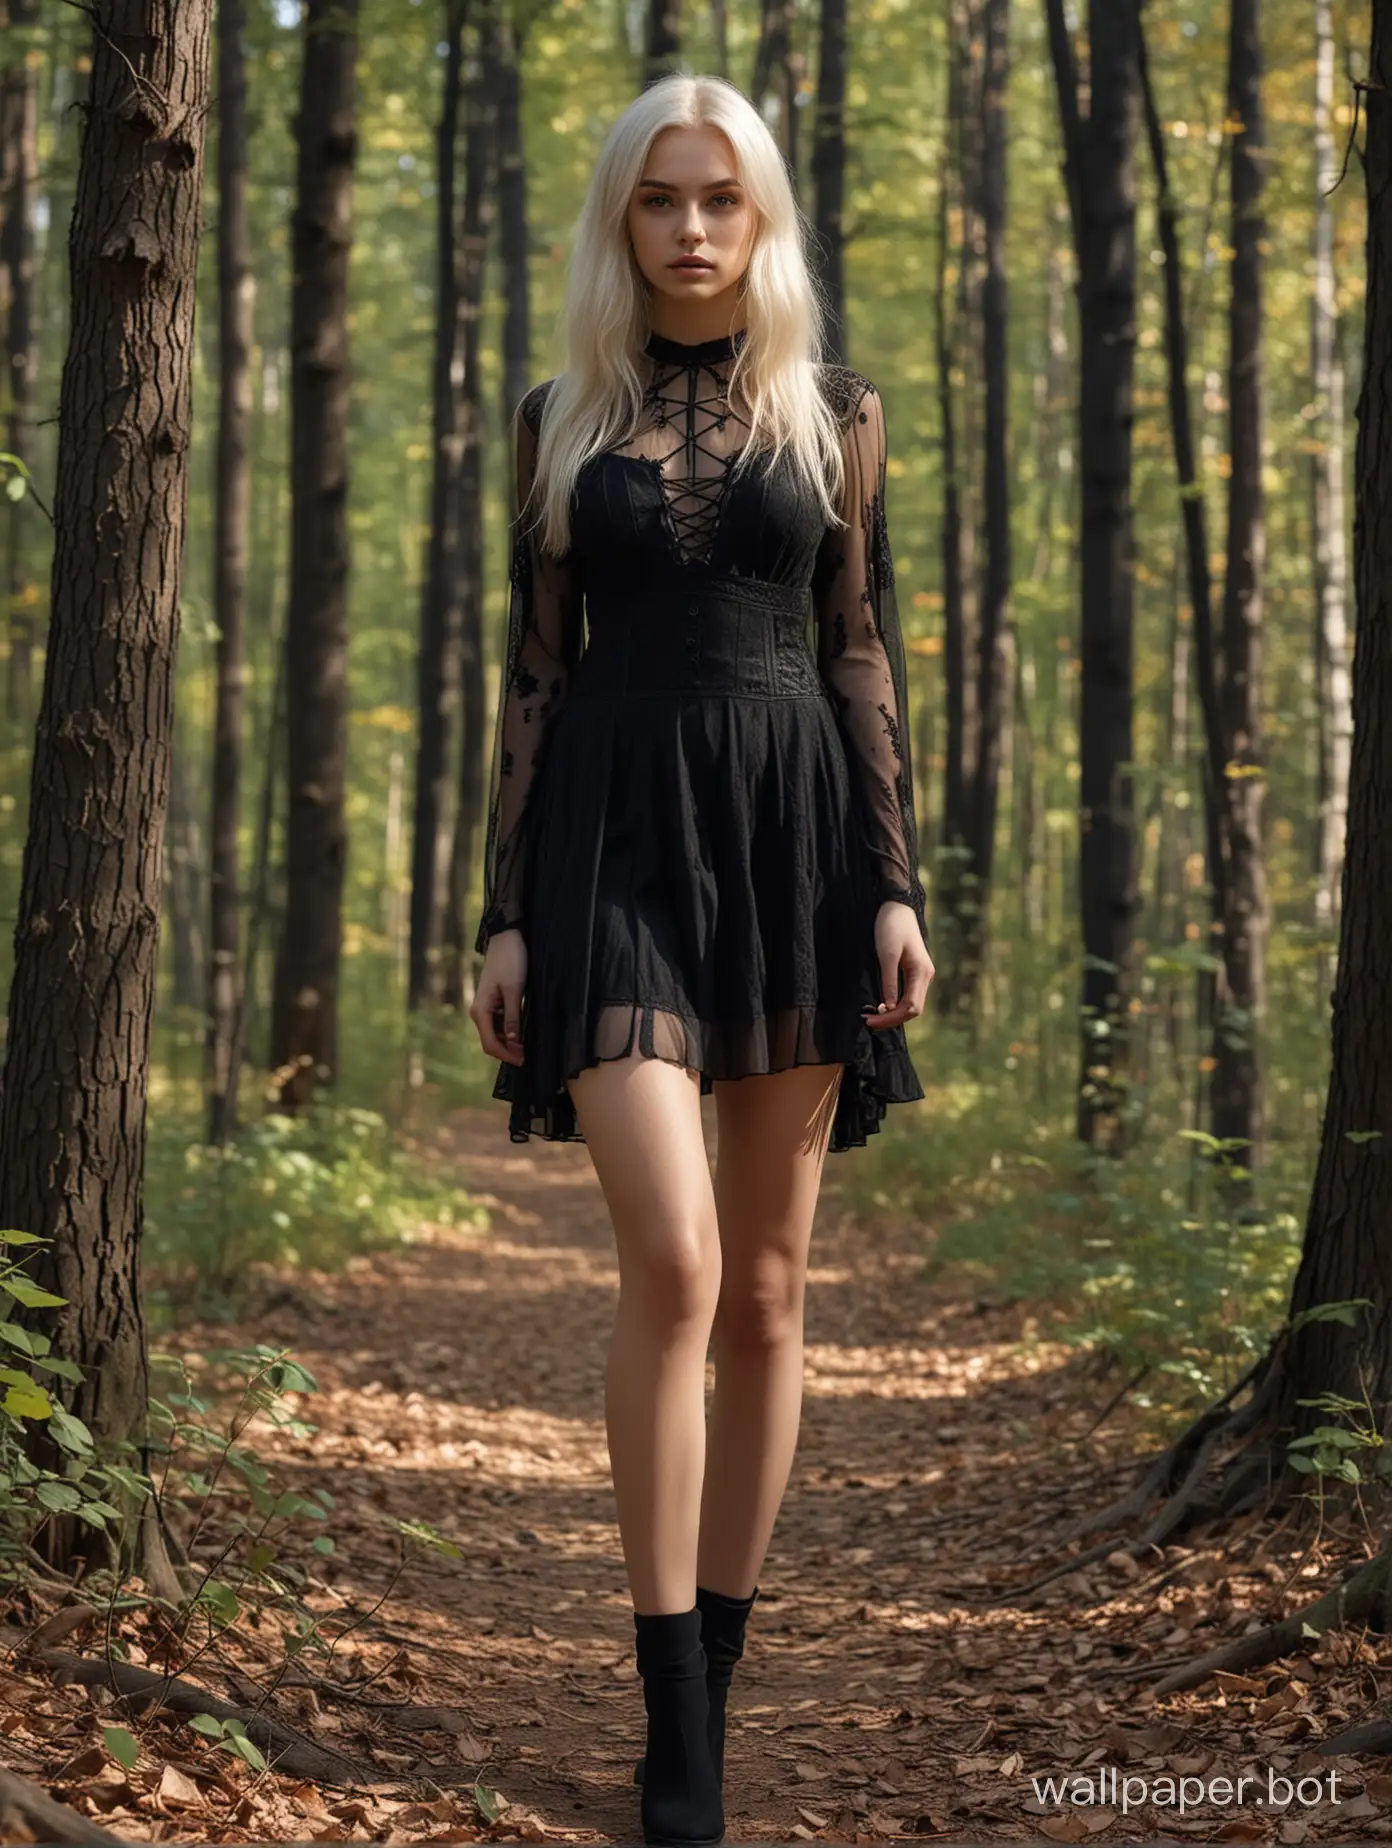 Russian-Model-in-Gothic-Sheer-Dress-Poses-in-Enchanted-Forest